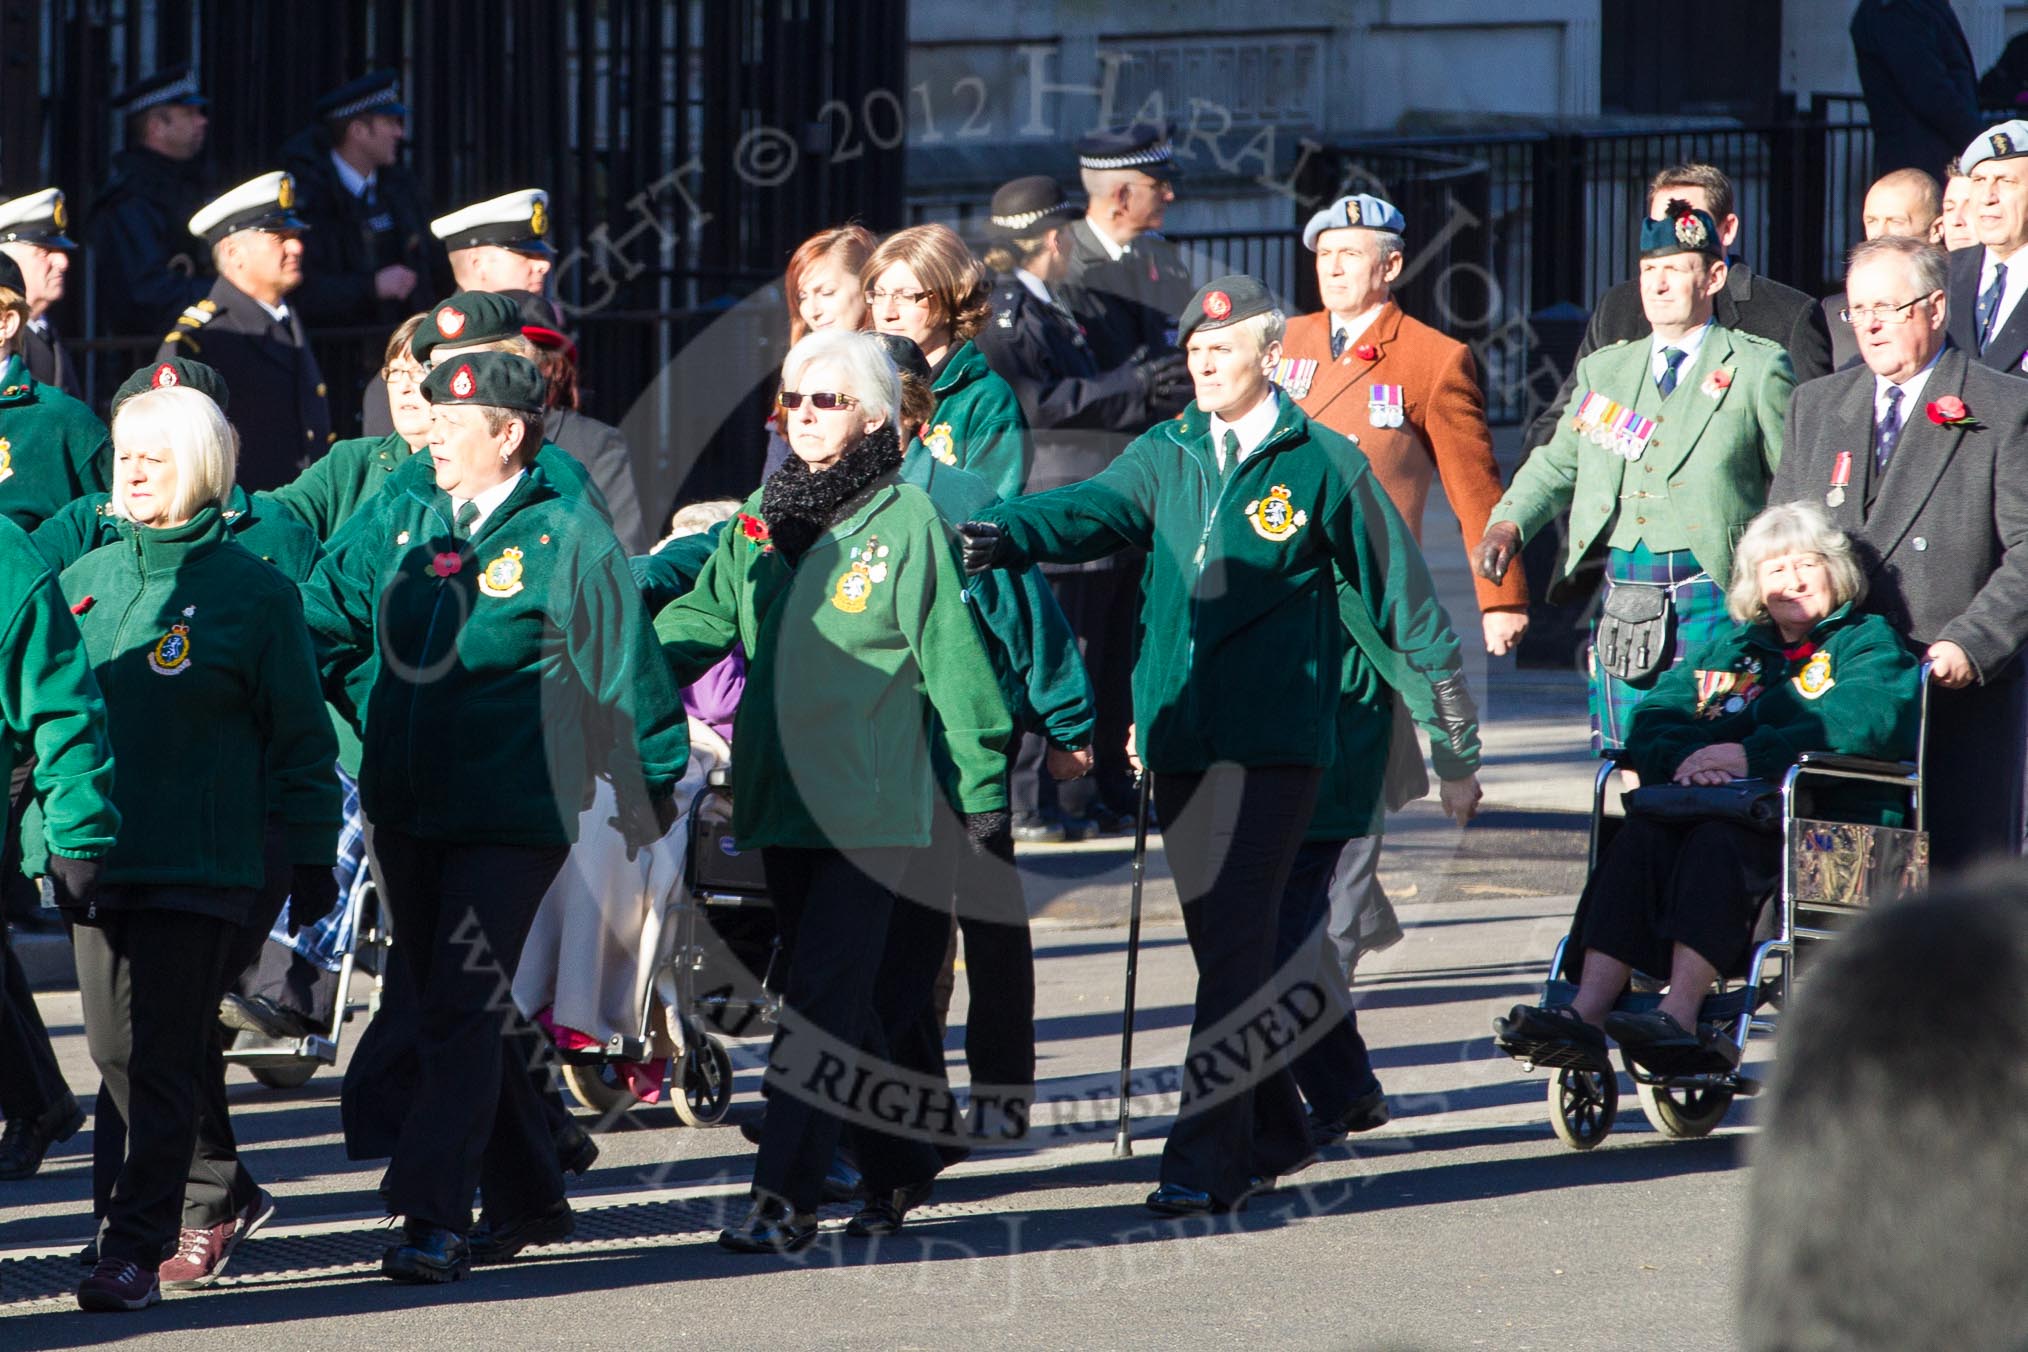 Remembrance Sunday 2012 Cenotaph March Past: Group B21 - Women's Royal Army Corps Association..
Whitehall, Cenotaph,
London SW1,

United Kingdom,
on 11 November 2012 at 11:57, image #952